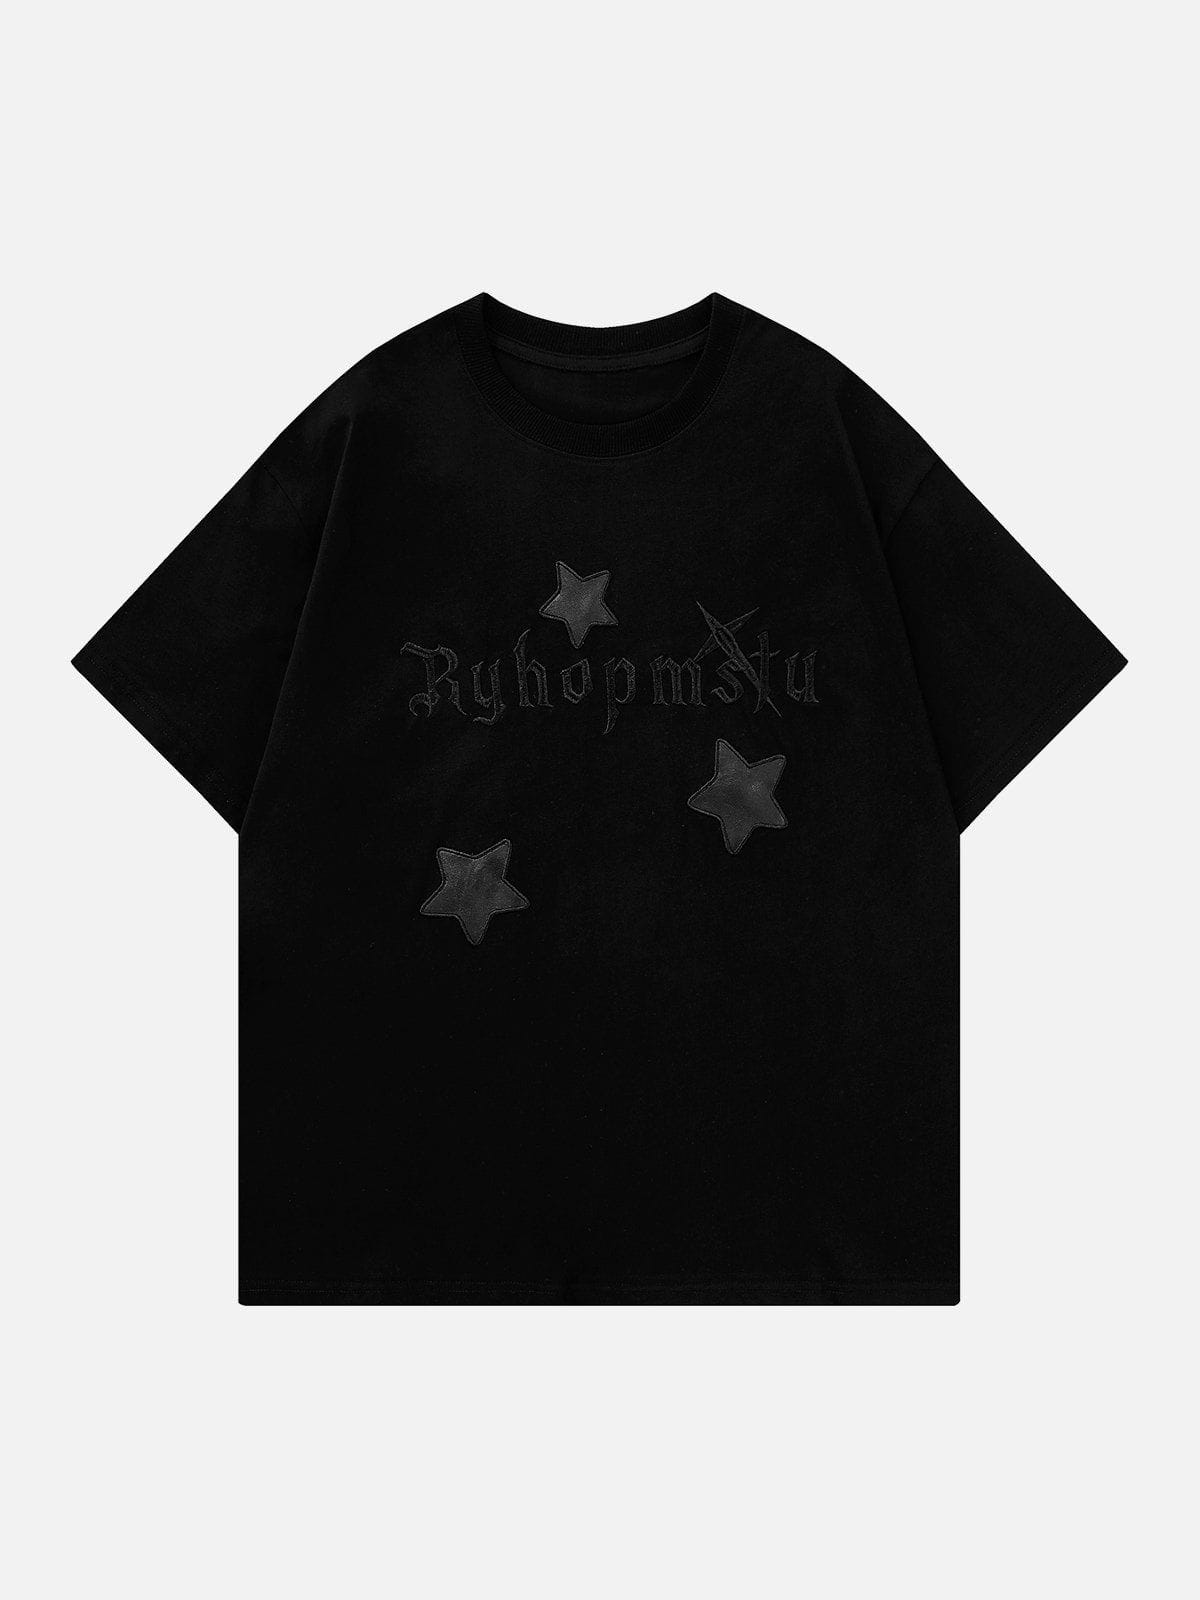 Sneakerland™ - Star Letter Embroidery Tee